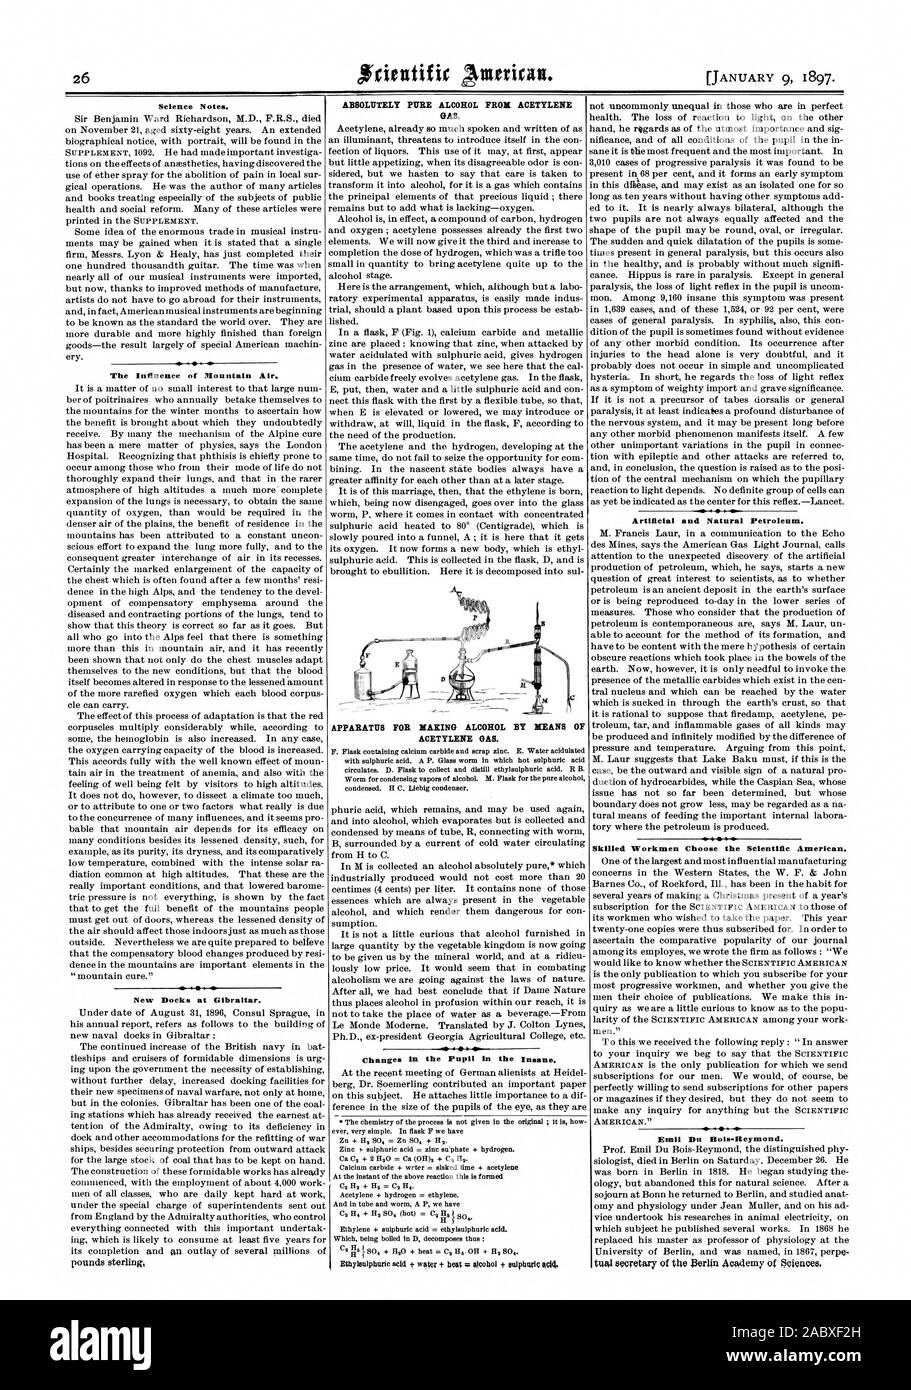 Science Notes. The Influence of Mountain Air. New Docks at Gibraltar. ABSOLUTELY PURE ALCOHOL FROM ACETYLENE GAS. APPARATUS FOR HARING ALCOHOL BY MEANS OF ACETYLENE OAS. Changes in the Pupil in the Insane. Artificial and Natural Petroleum. Skilled Workmen Choose the Scientific American. Emil Du Bois-Reymond., 1897-01-09 Stock Photo